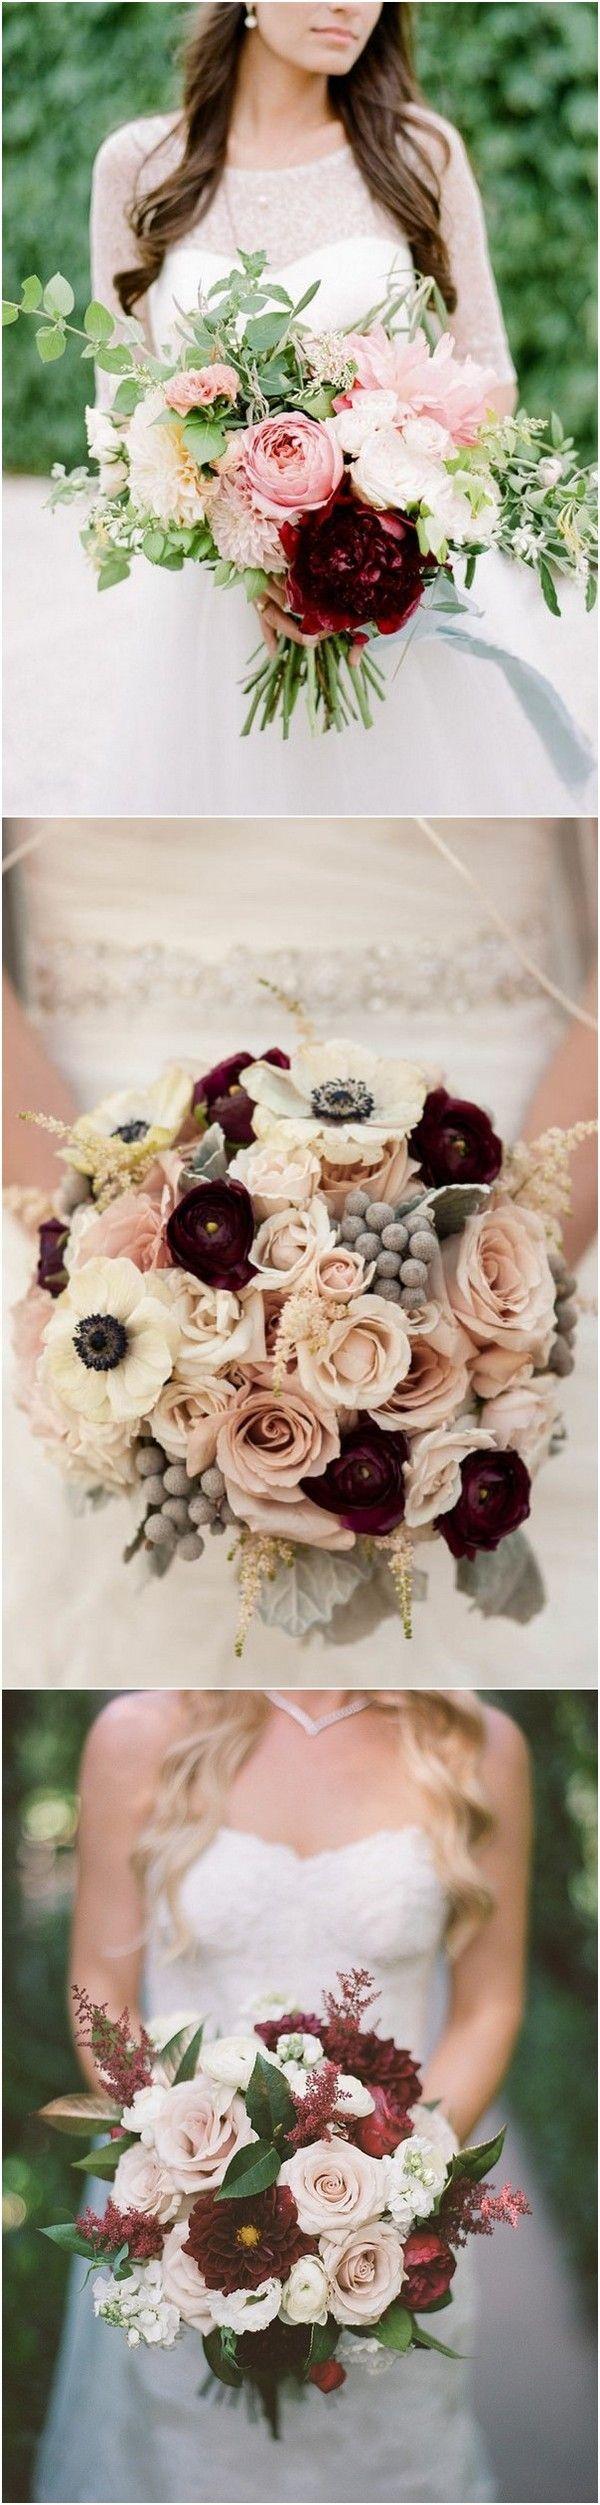 Mariage - Trending-15 Gorgeous Burgundy And Blush Wedding Bouquet Ideas - Page 3 Of 3